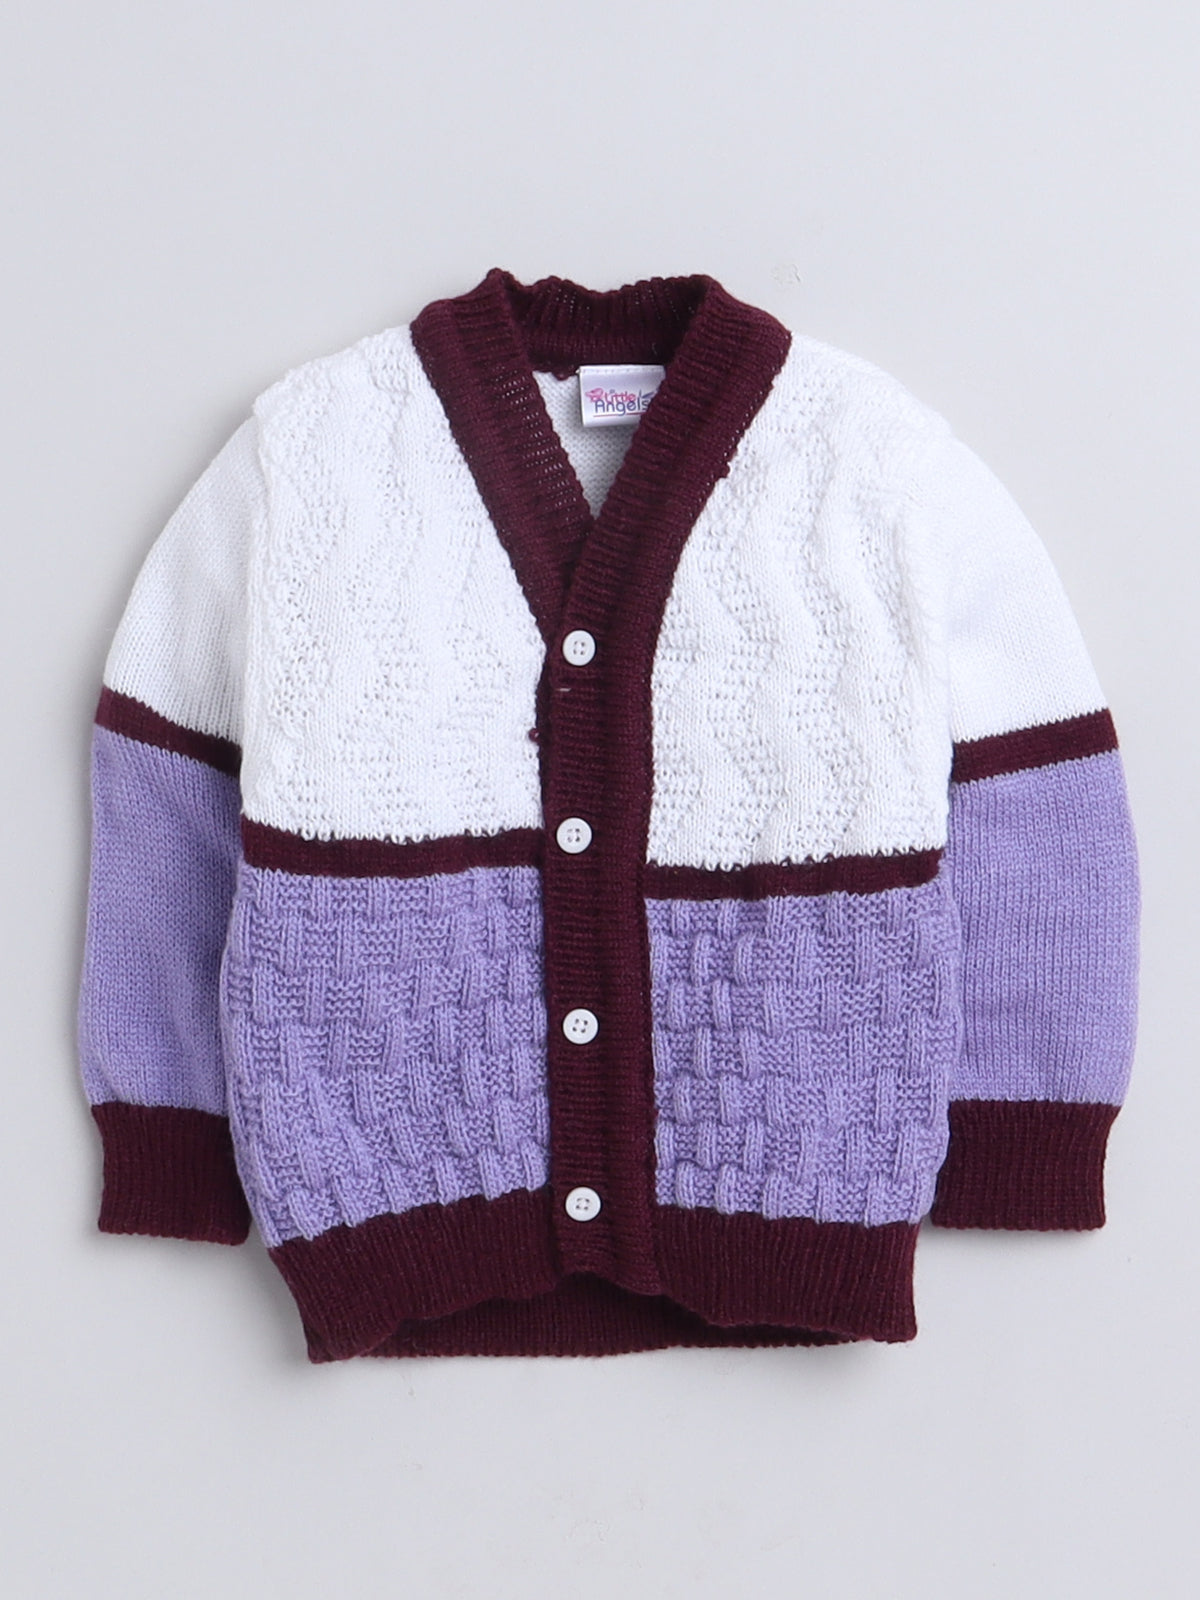 3 Pcs Sweater Full Sleeve Front Open Lotus Knit White and Violet with Matching Caps and Socks for Baby